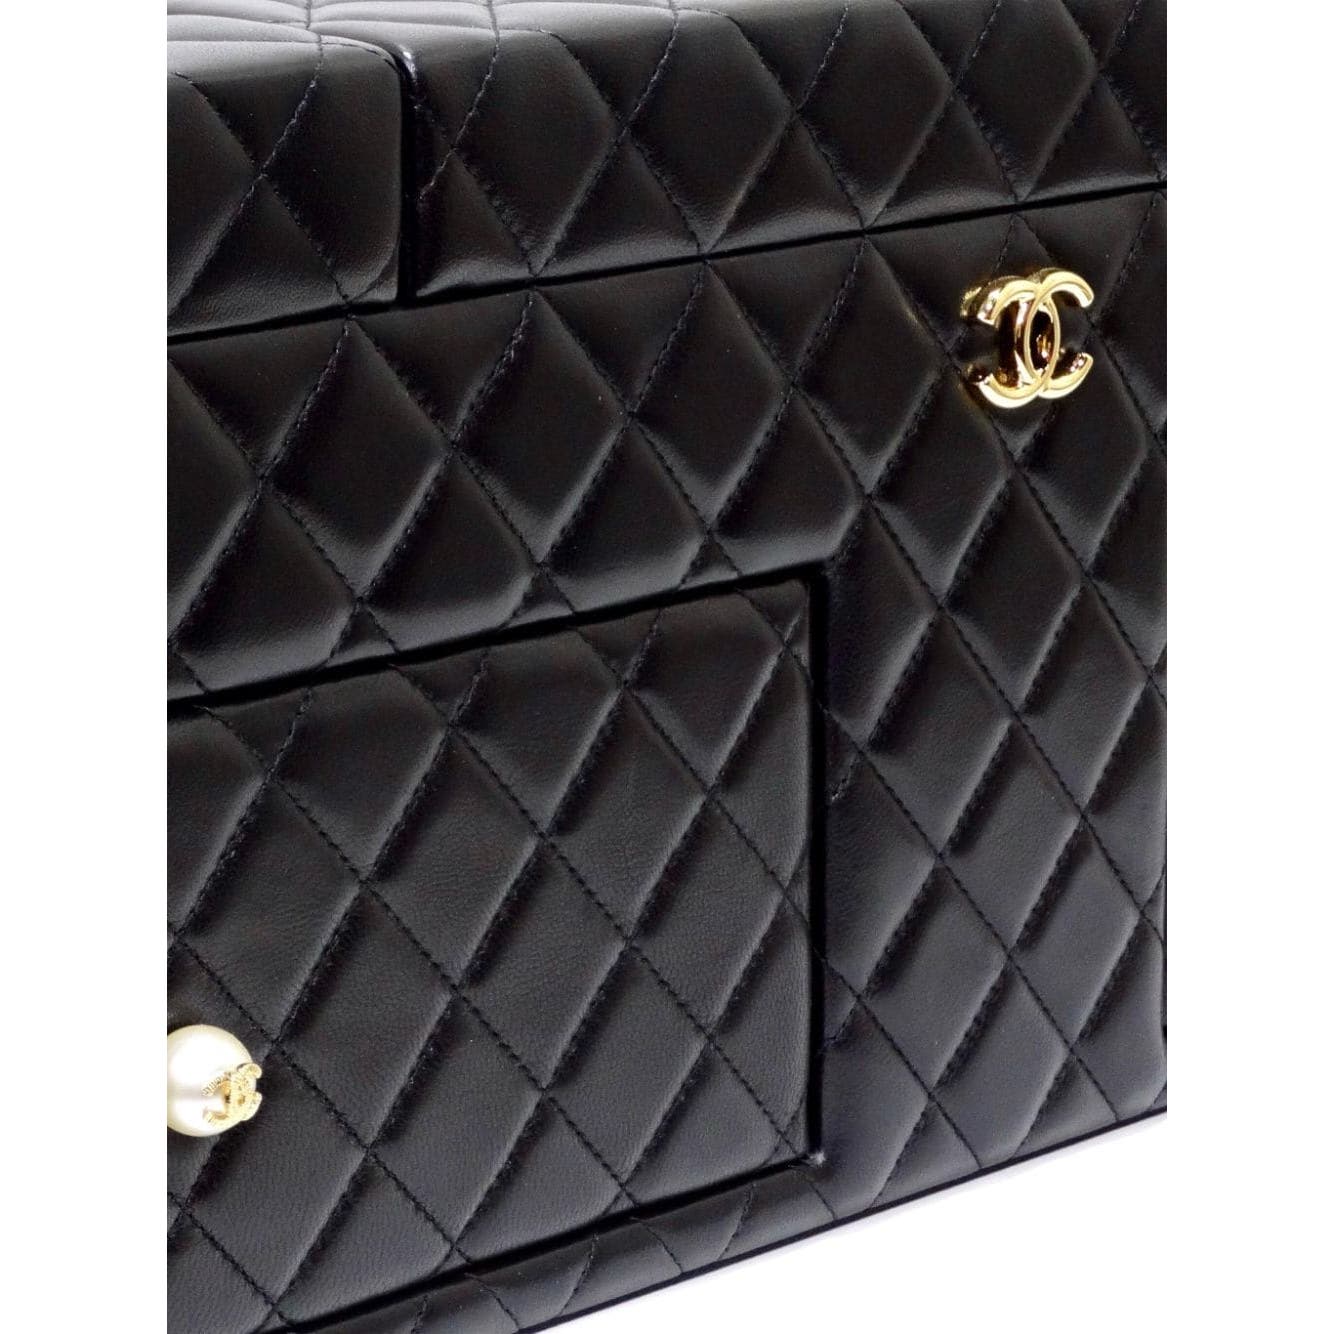 Chanel Diamond Quilted Lambskin Giant Jewelry Decor Case